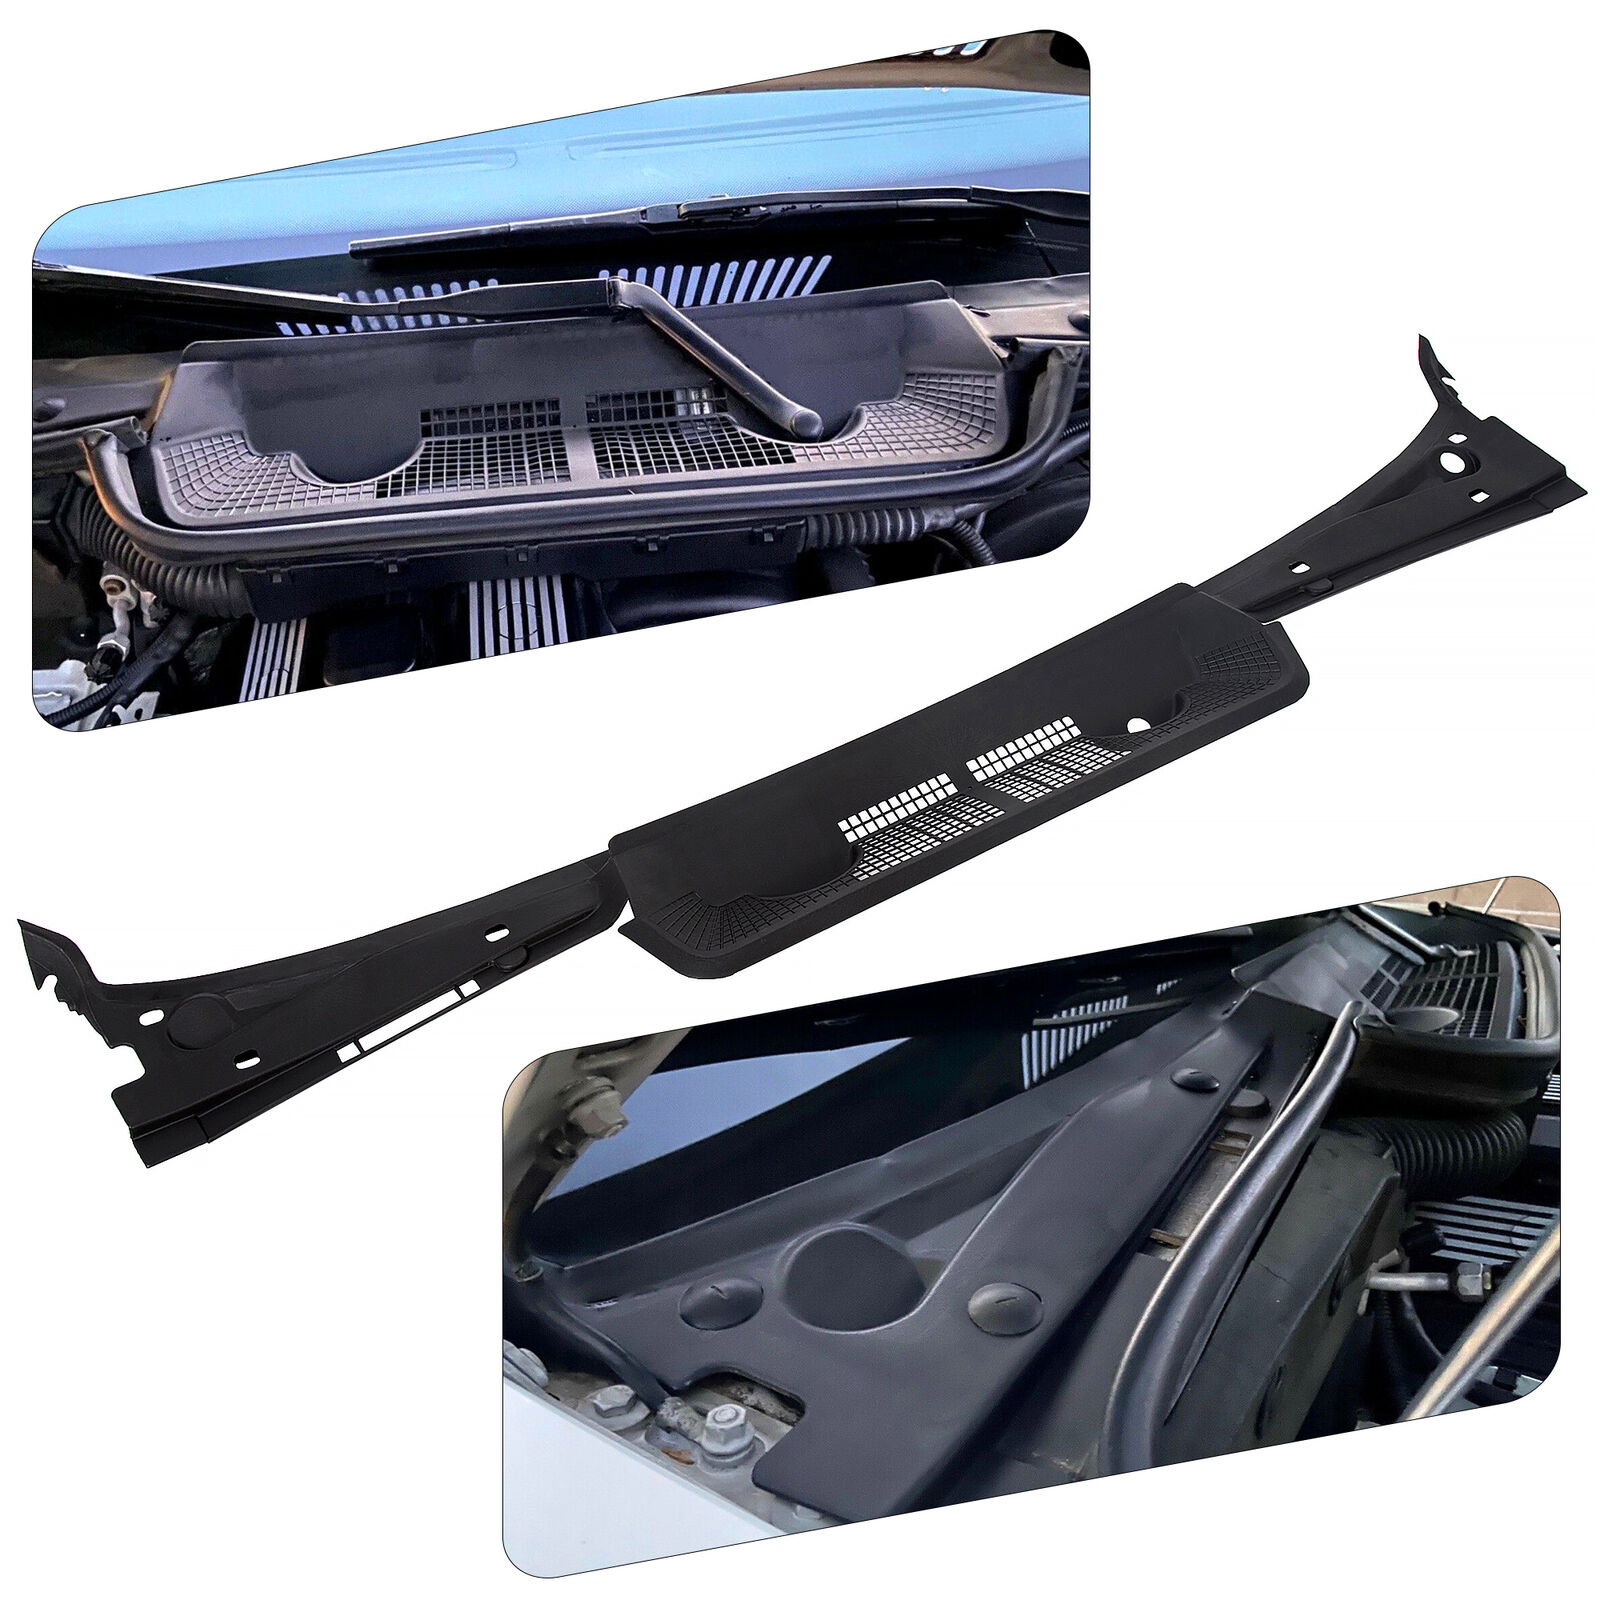 Windshield Wiper Motor Cover Assembly Hood Cowl Trim Covering Fits BMW E36 318i